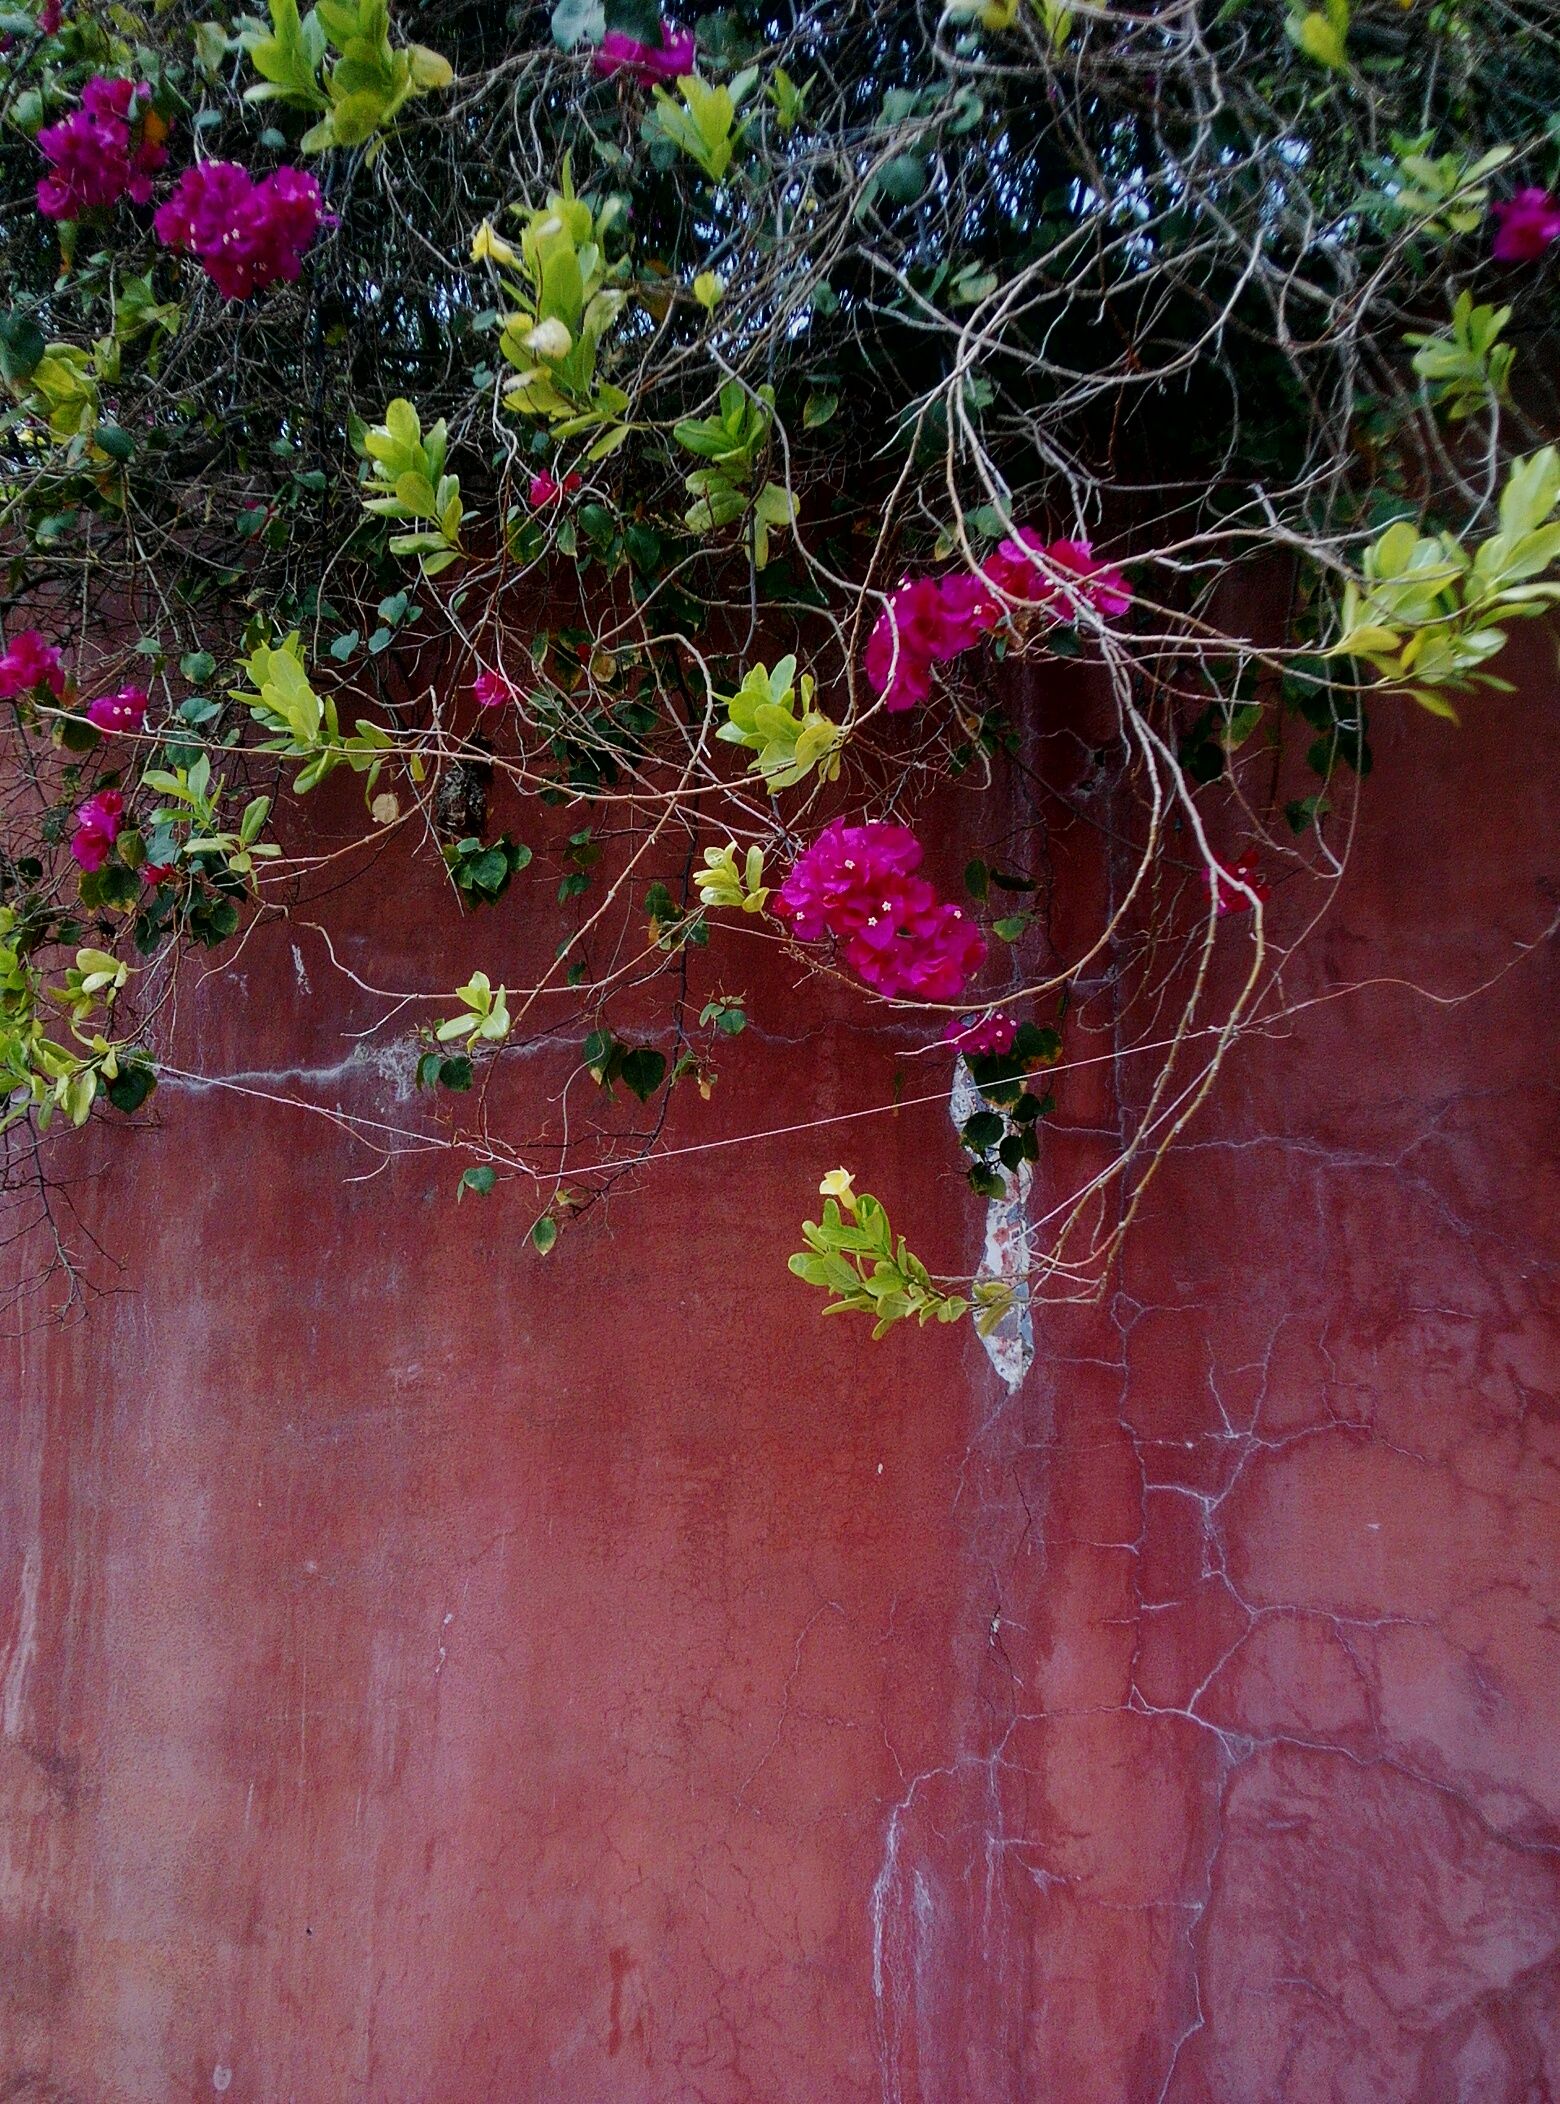 flower, growth, plant, pink color, leaf, nature, freshness, fragility, branch, beauty in nature, wall - building feature, purple, high angle view, outdoors, day, no people, growing, pink, tree, close-up